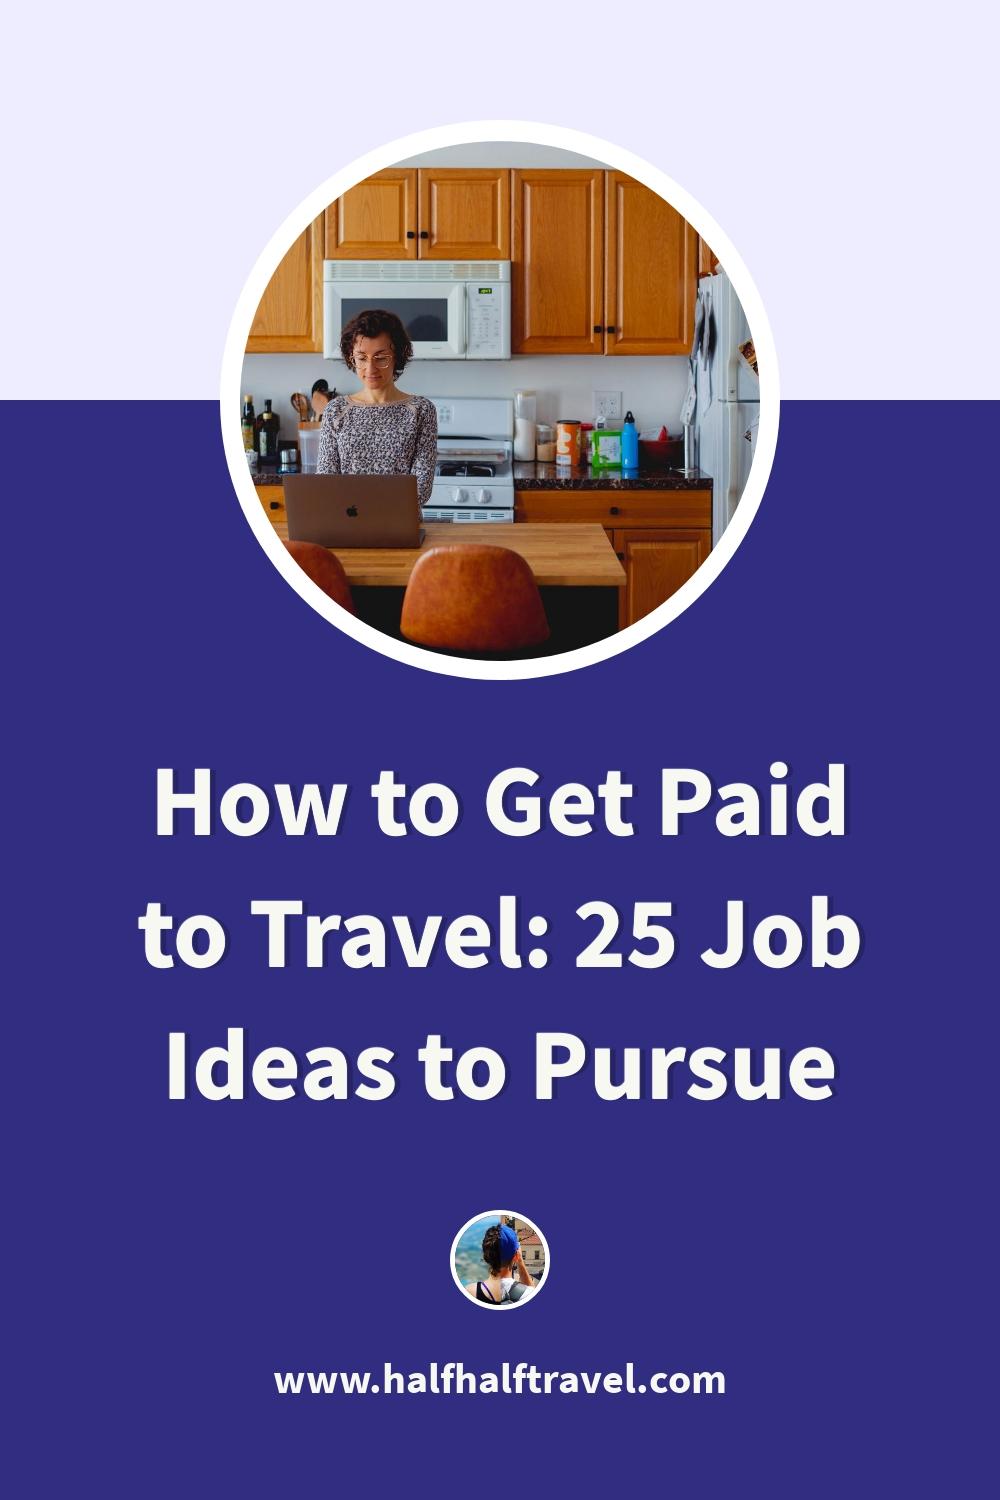 Pinterest image from the 'How to get paid to travel: 25 job ideas to pursue' article on Half Half Travel